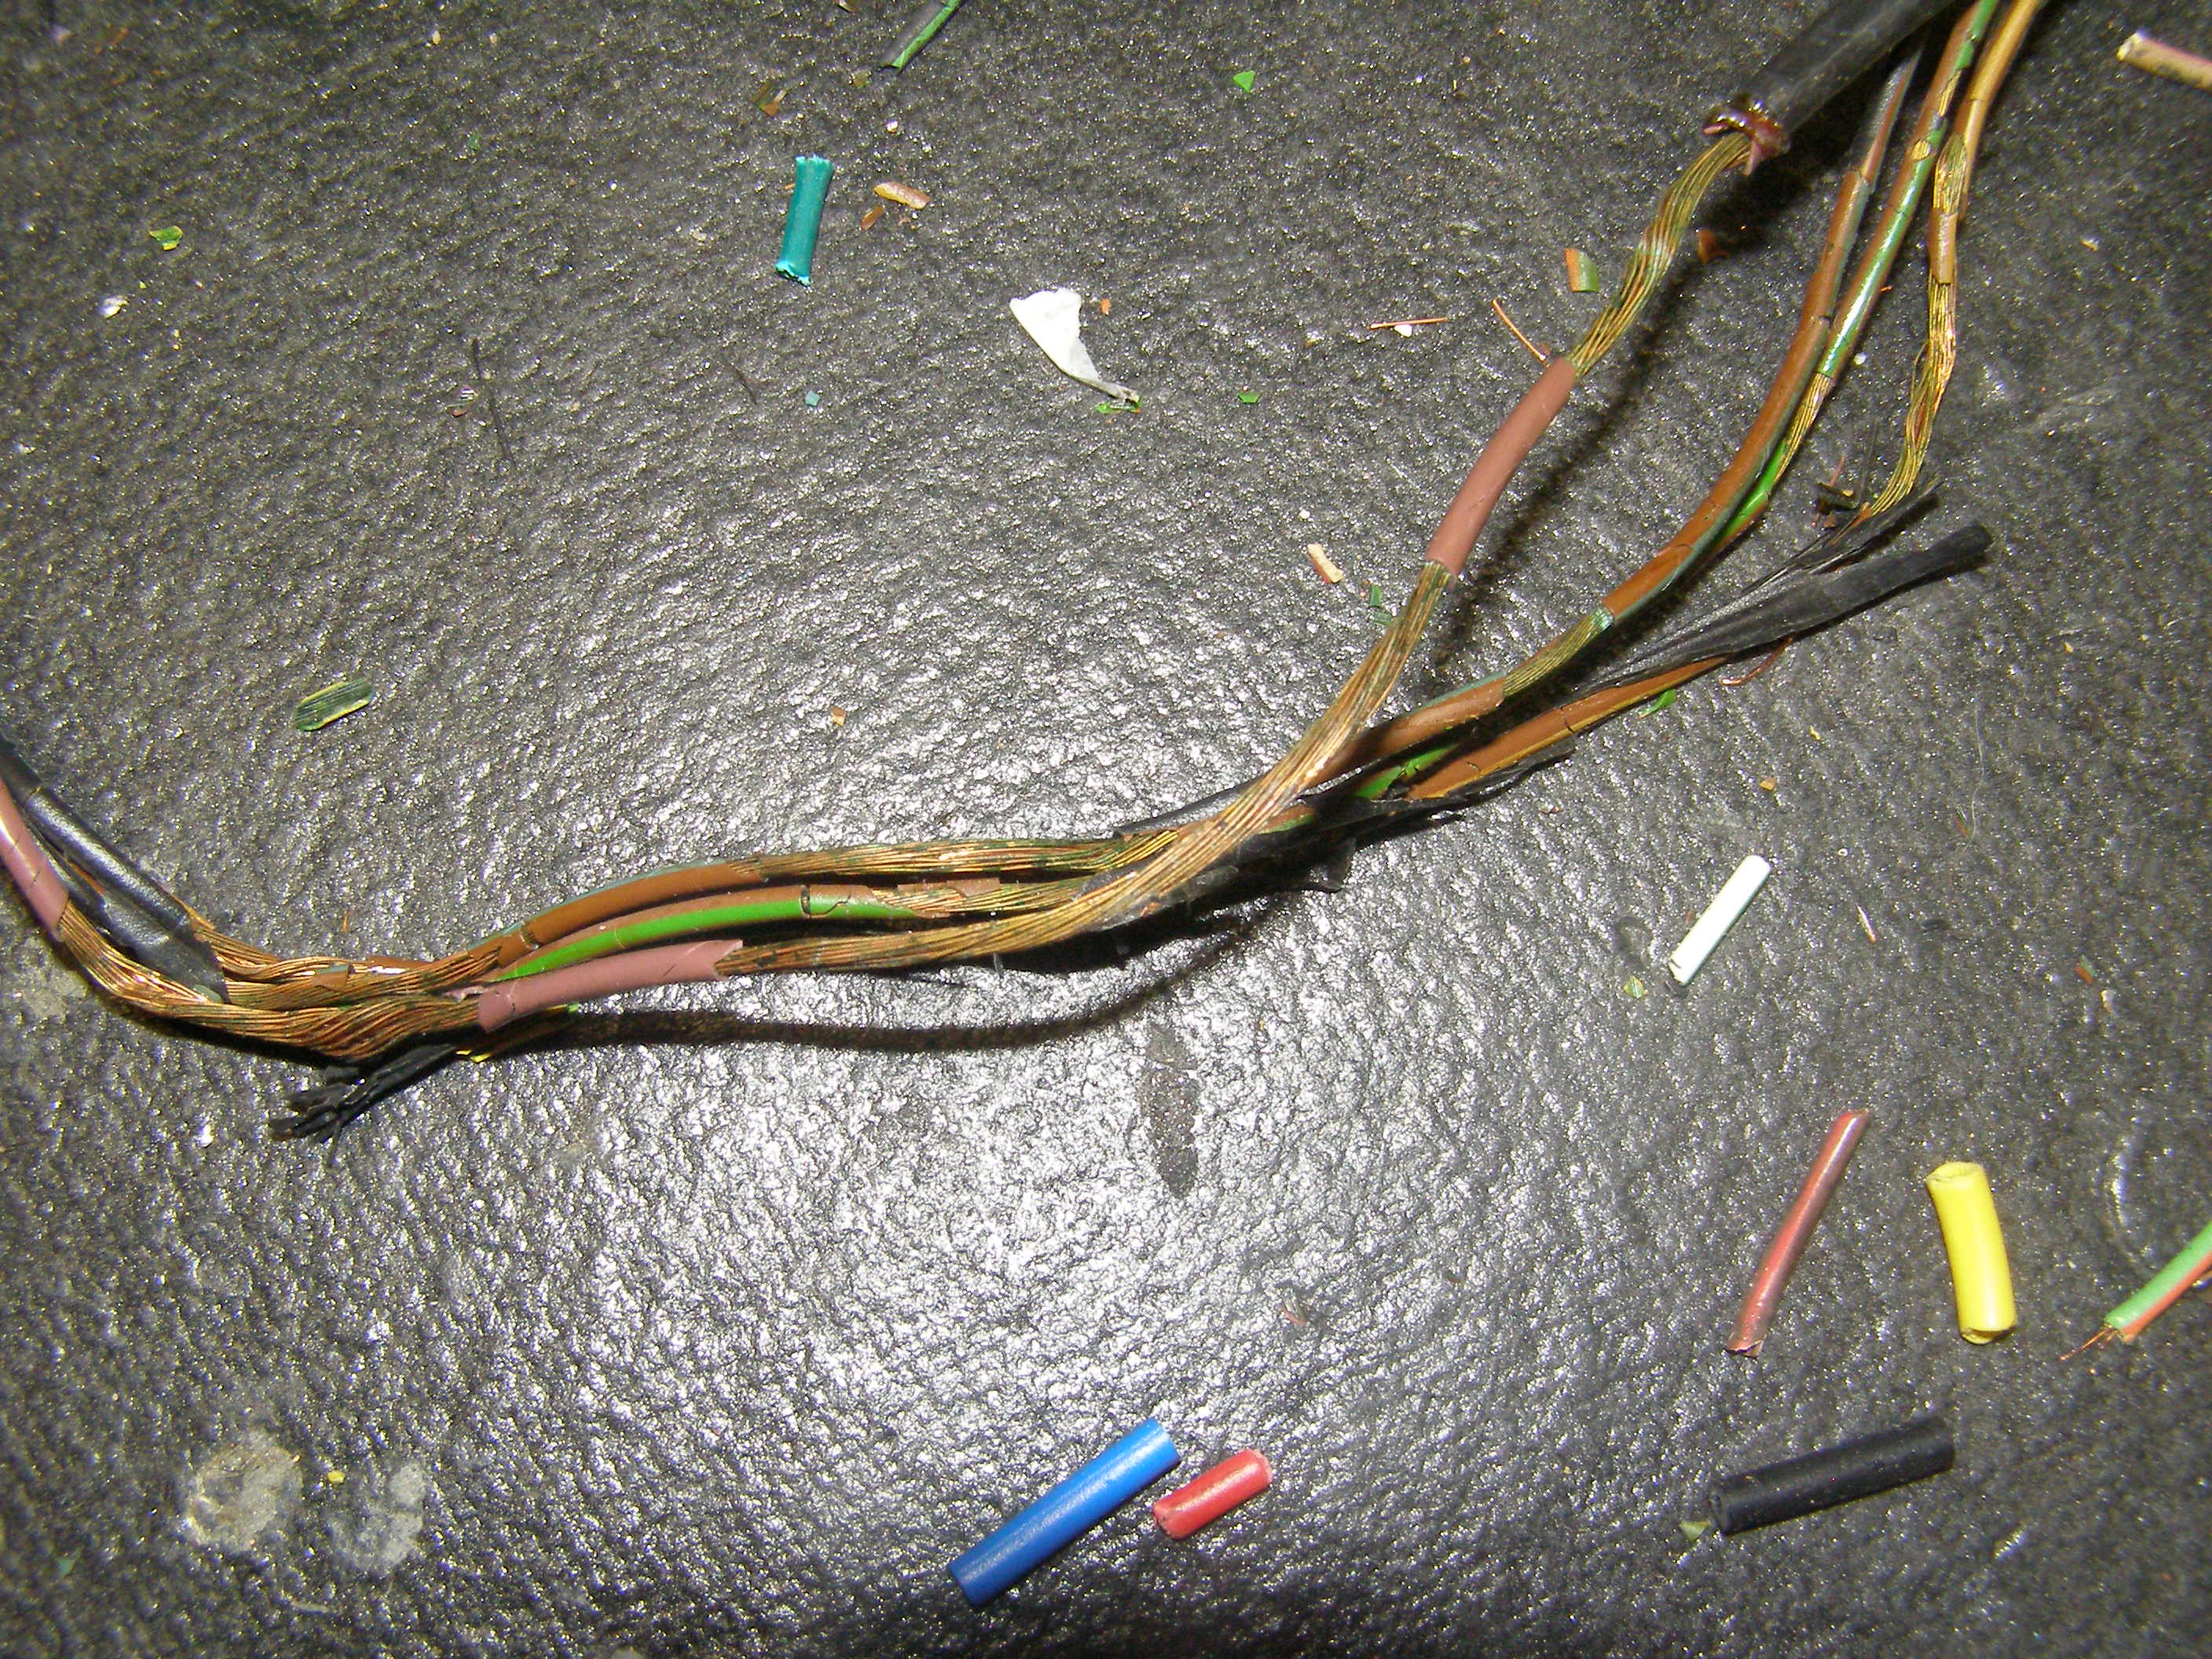 Biodegradable Wiring Harness Heat Makes The Insulation Brittle